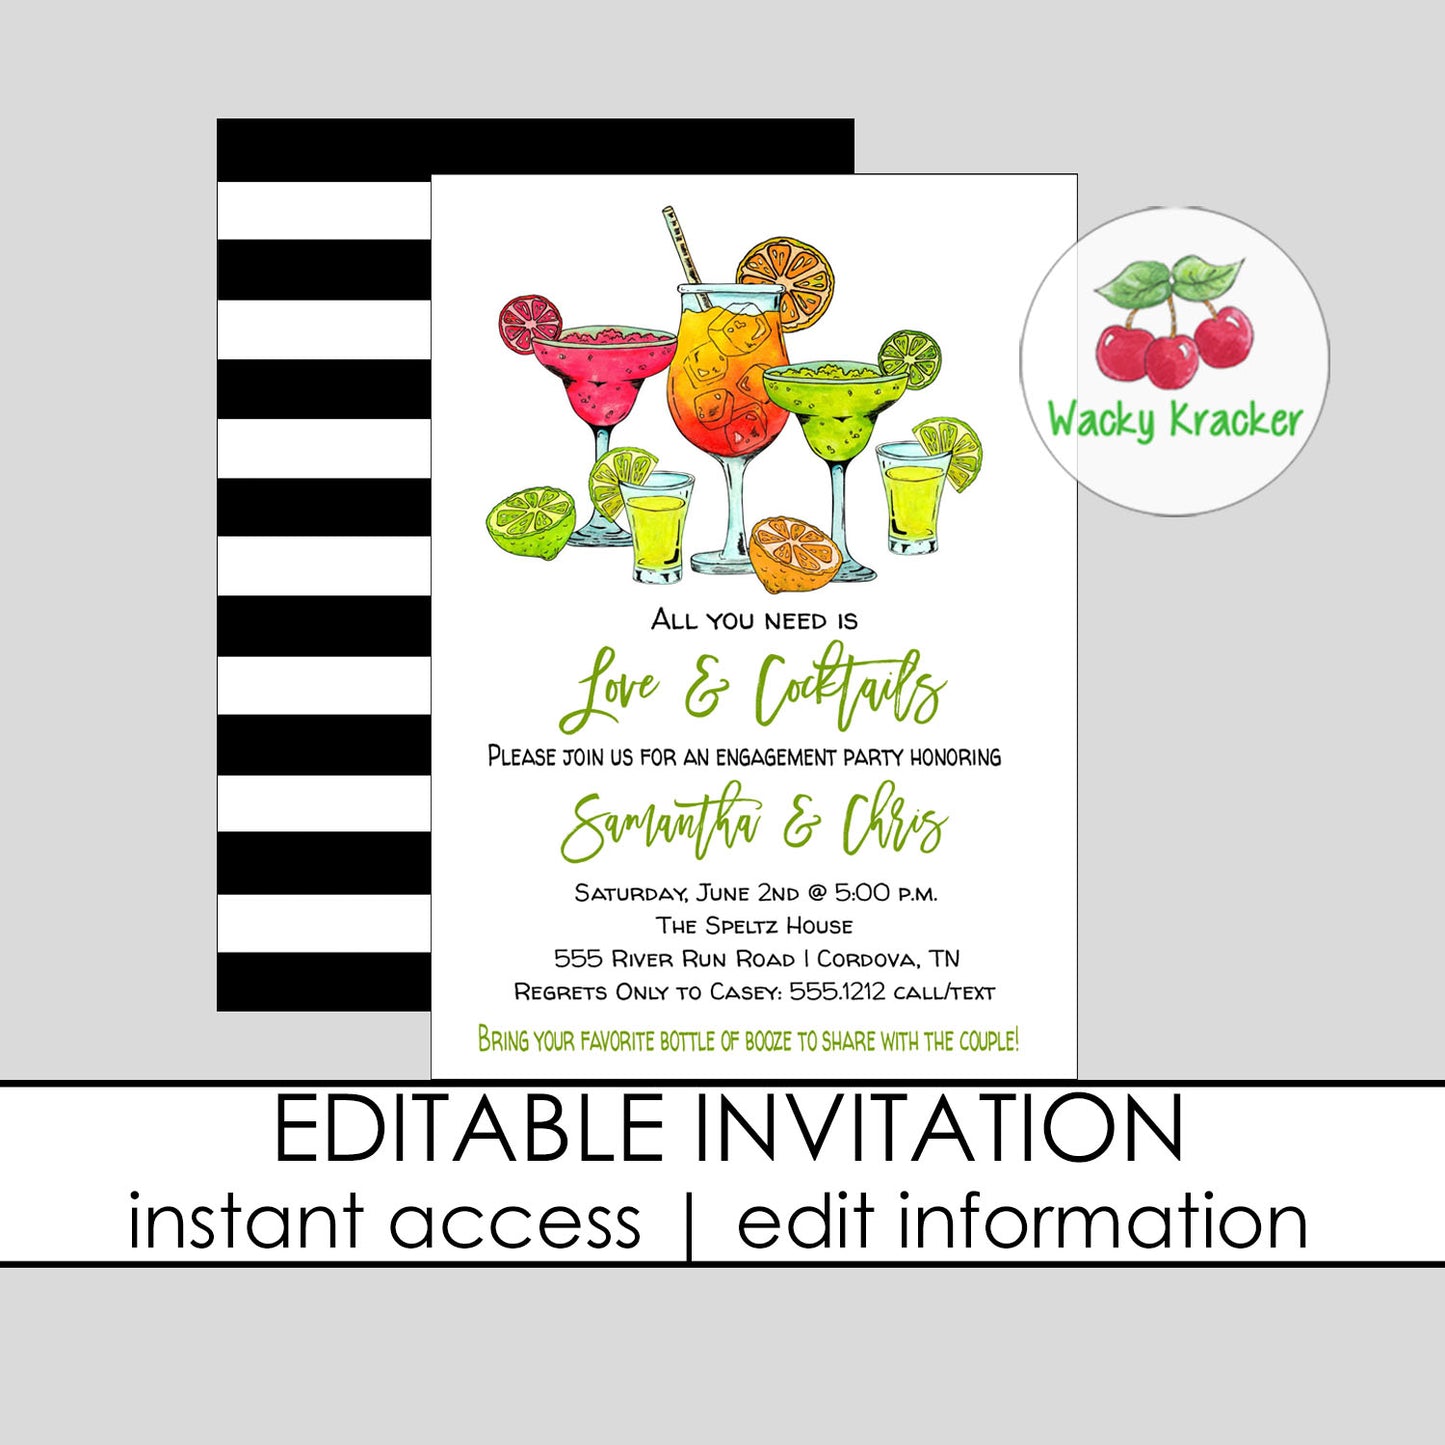 Love and Cocktails Invitation